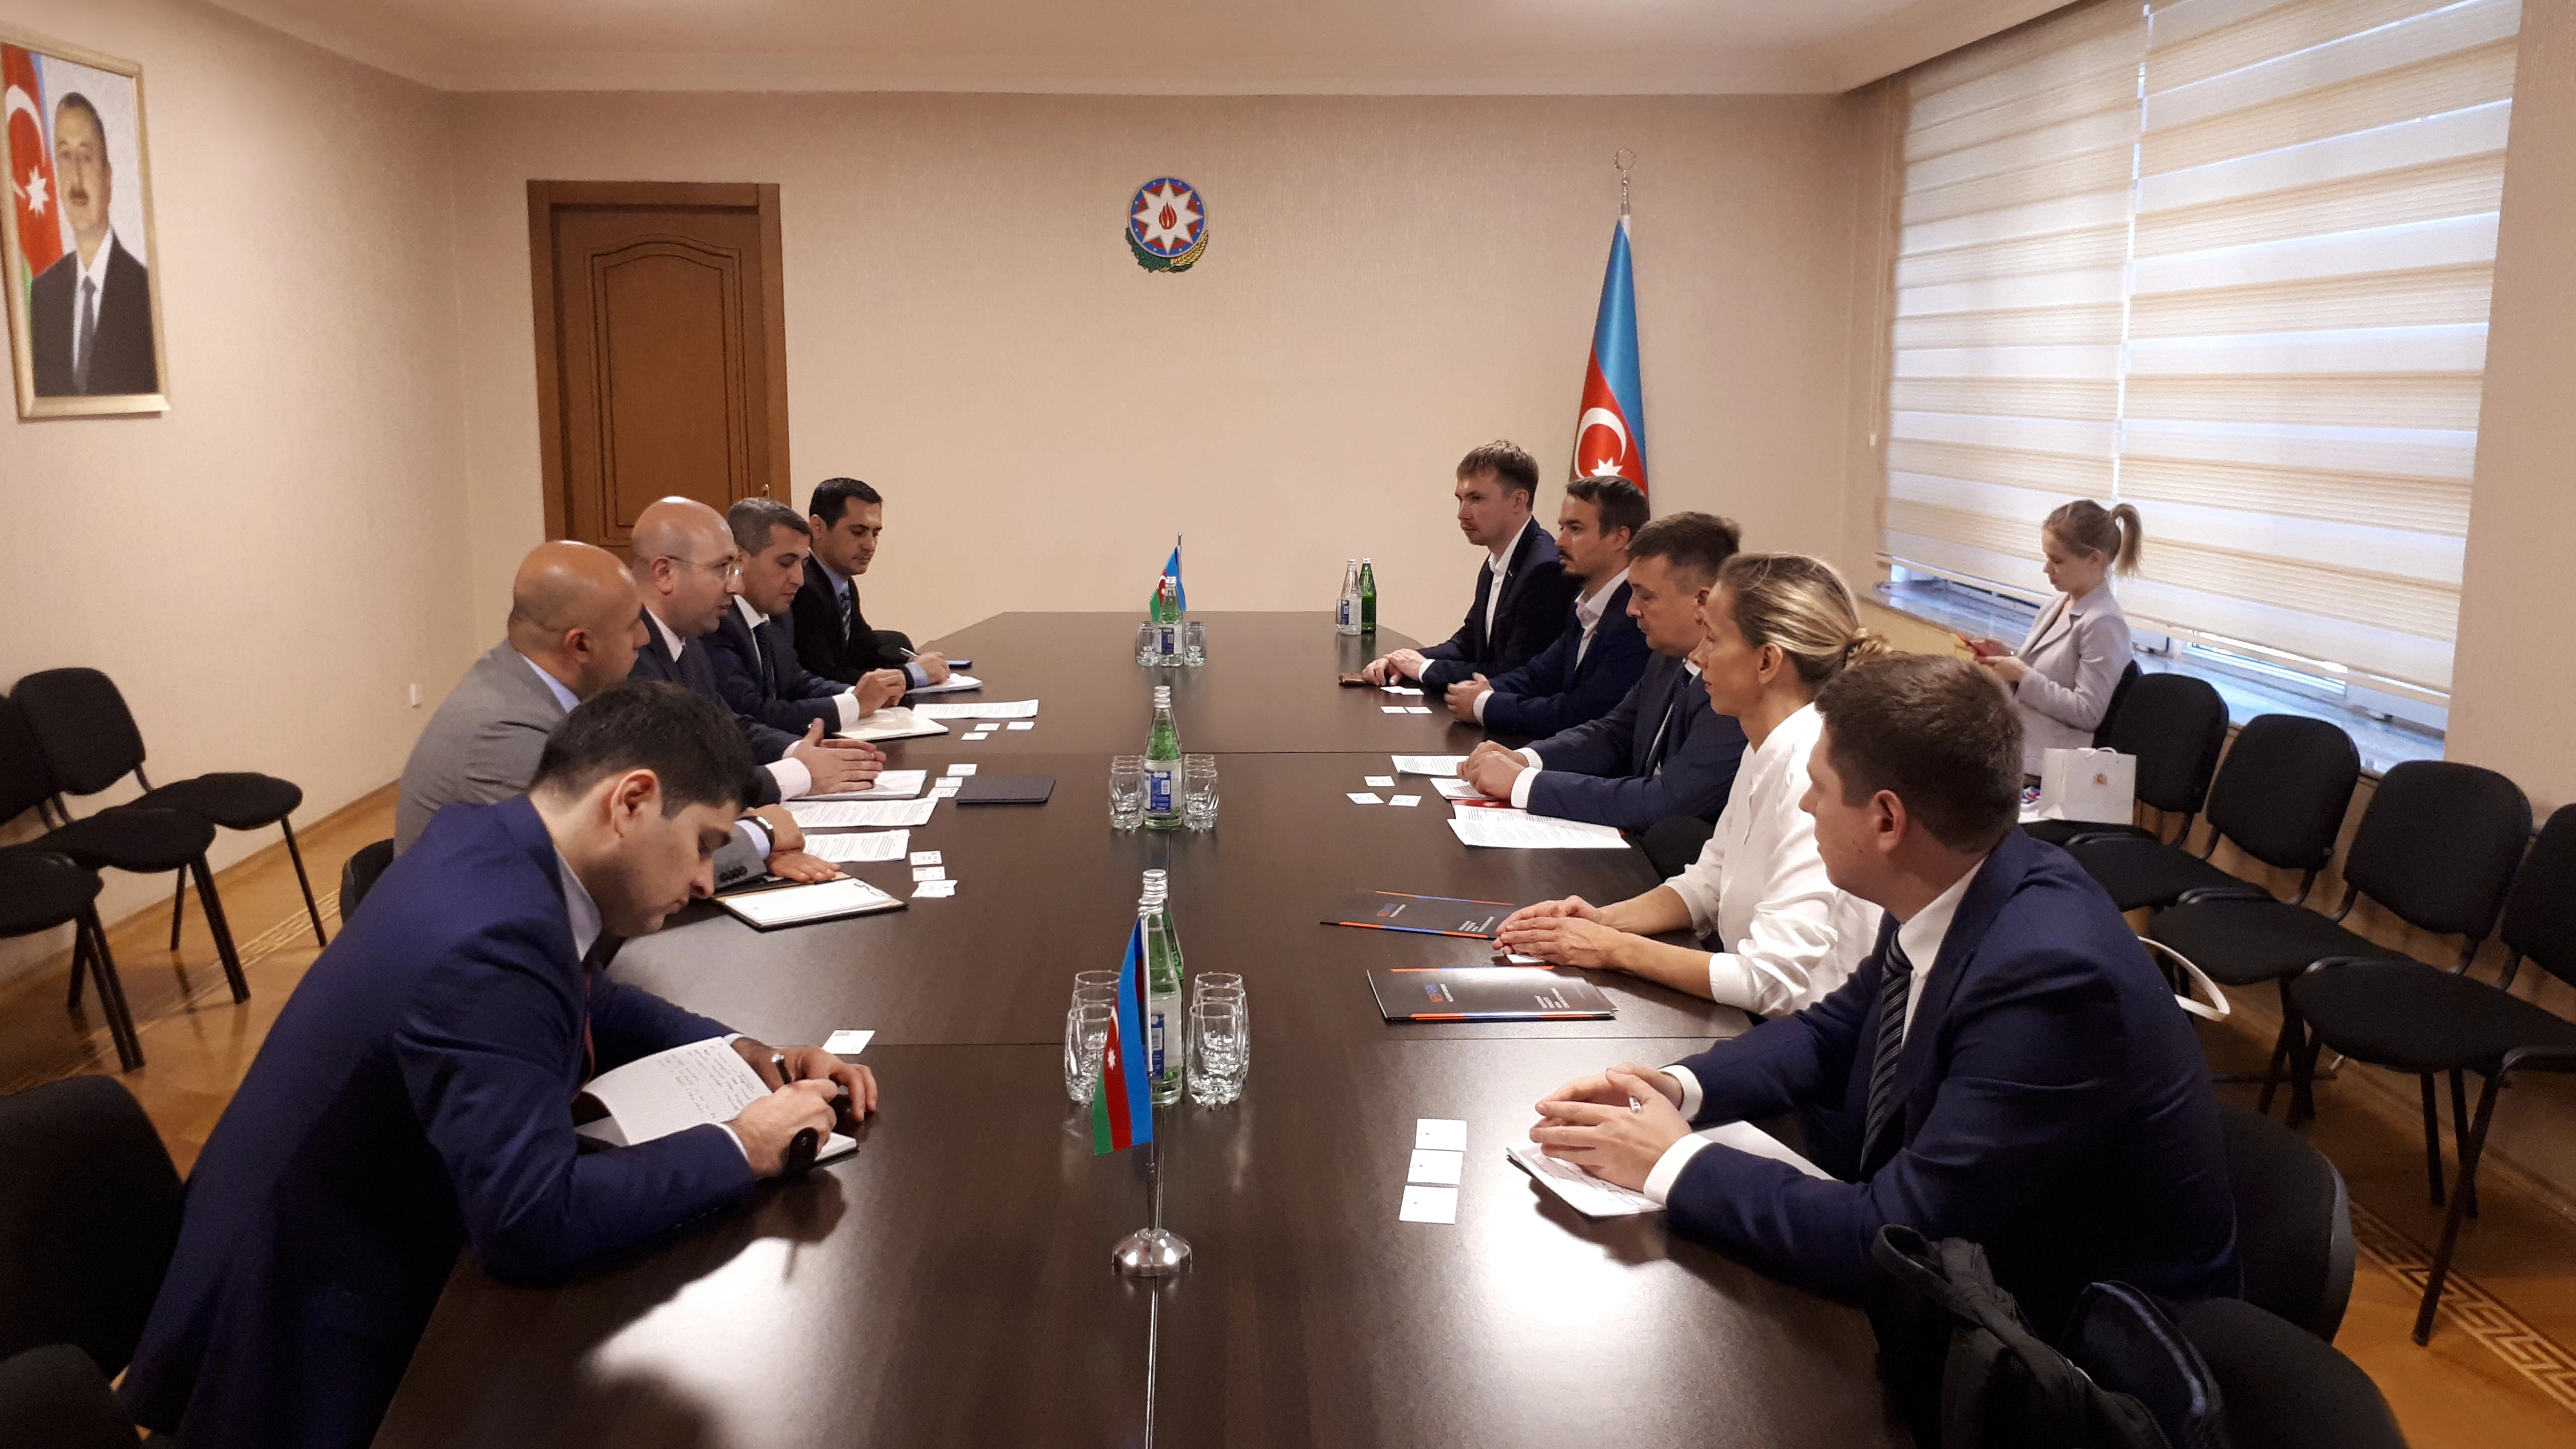 The State Committee on Urban Planning and Architecture met with a delegation of the Sverdlovsk Region of Russia